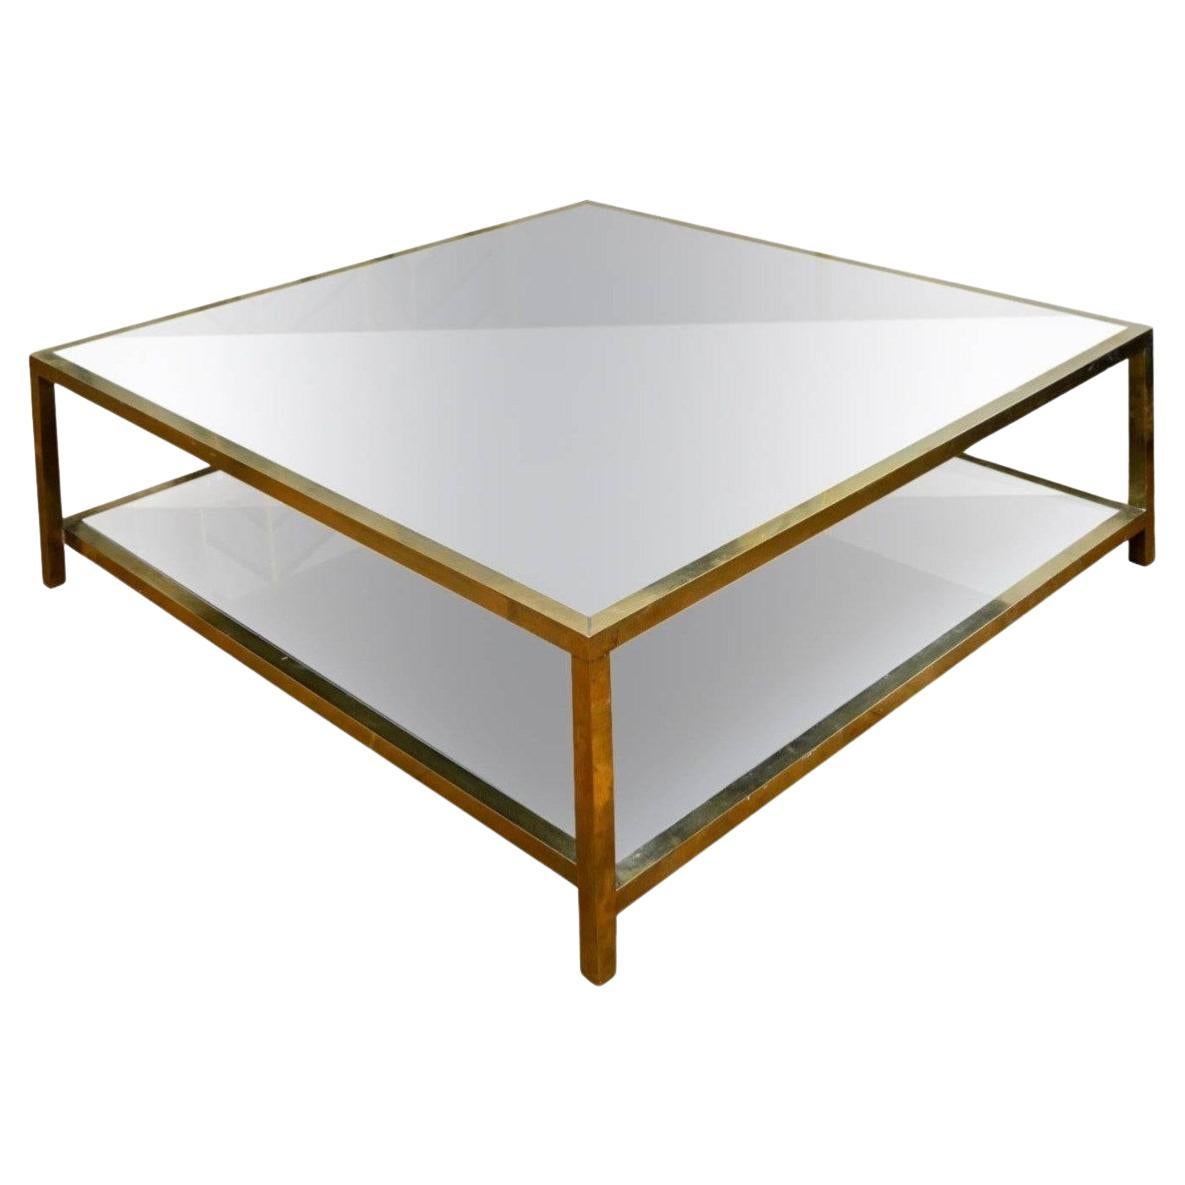 Tainted mirror coffee table At Cost Price For Sale